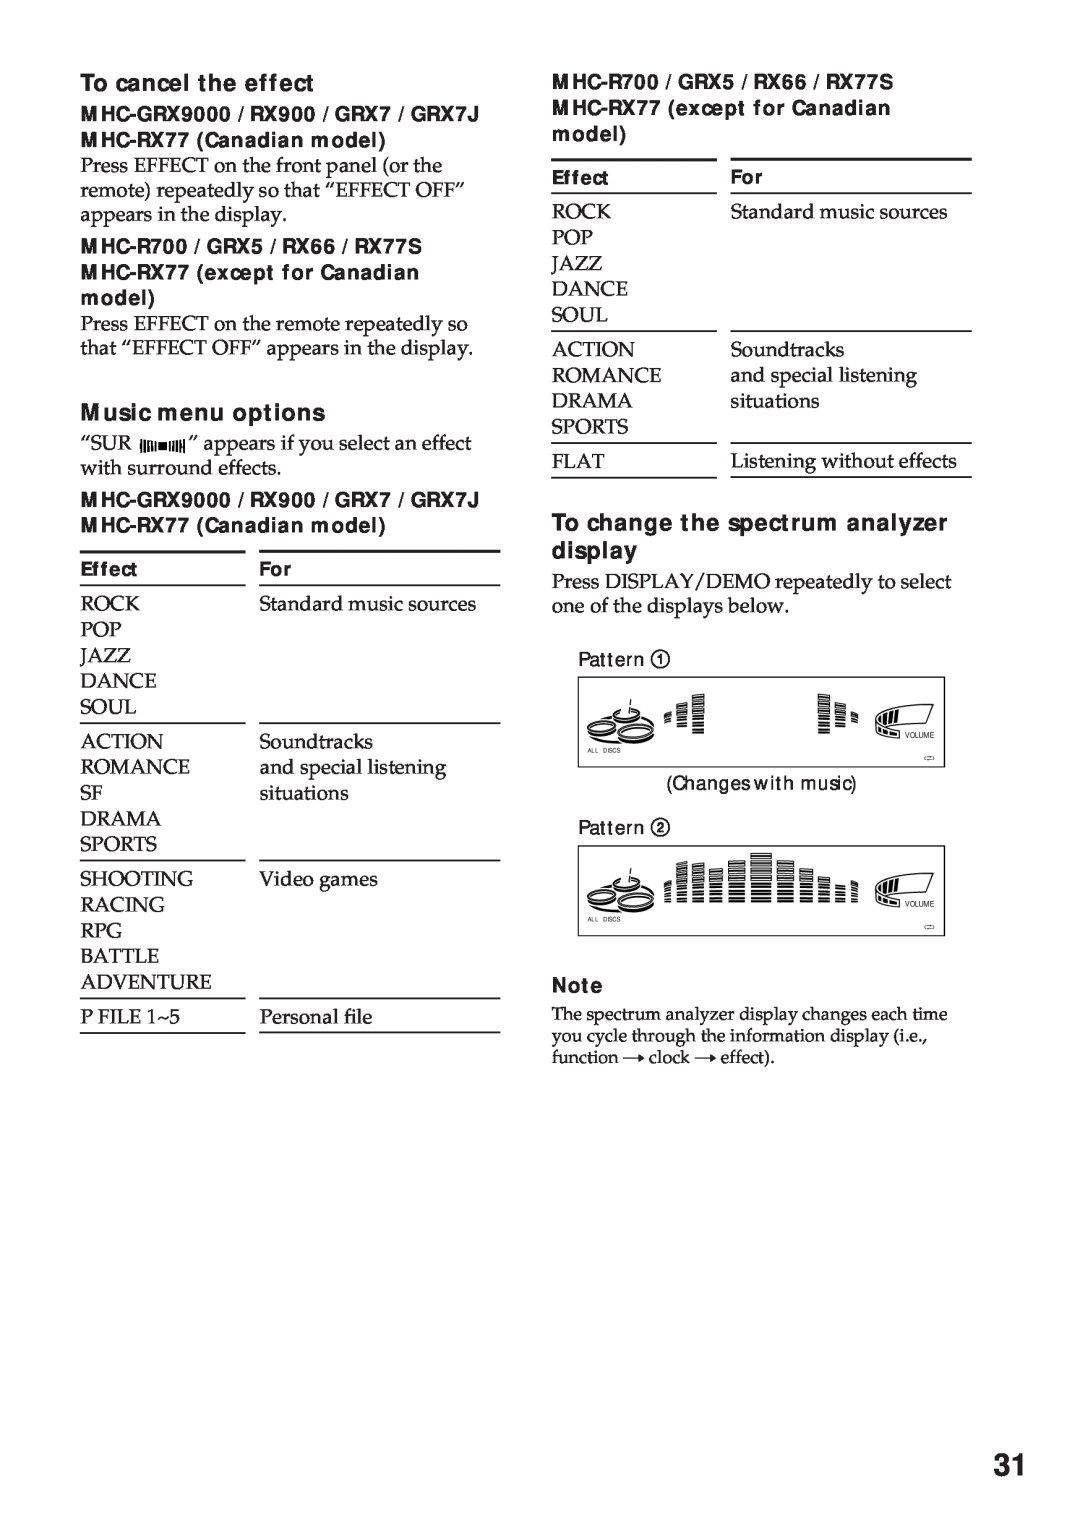 Sony MHC-RX900 manual To cancel the effect, Music menu options, To change the spectrum analyzer display 